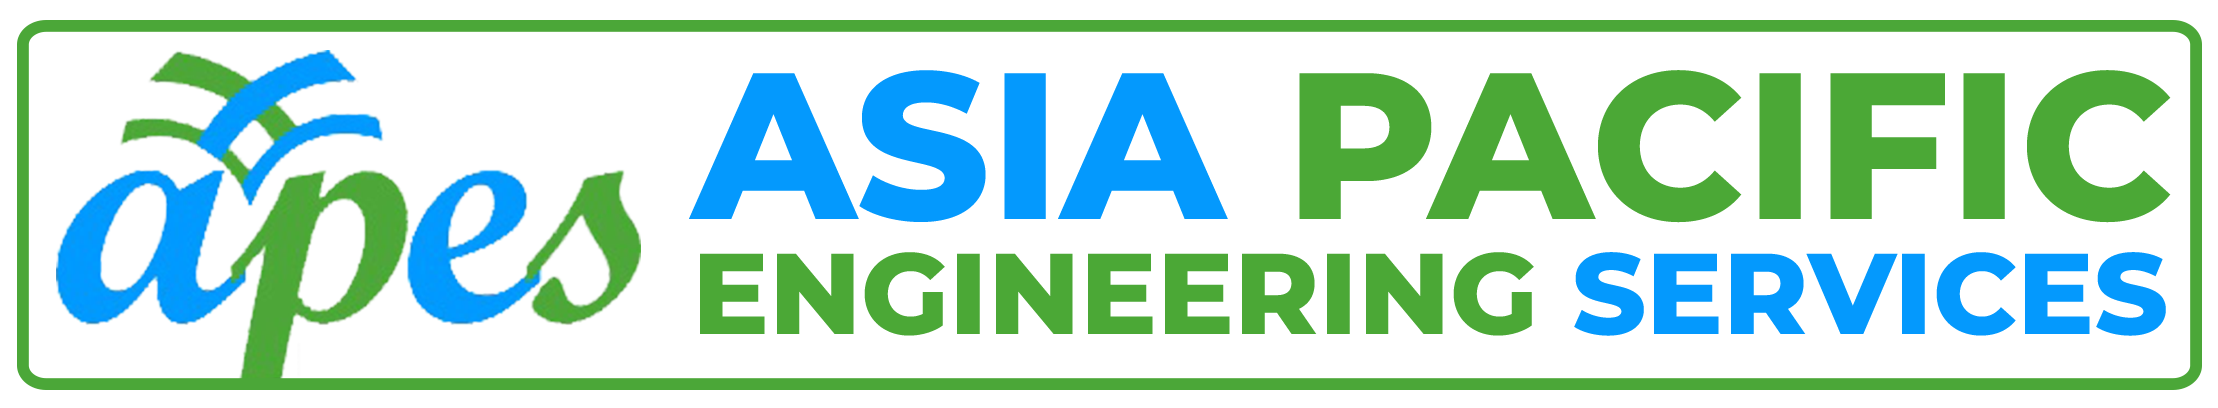 Asia Pacific Engineering Services